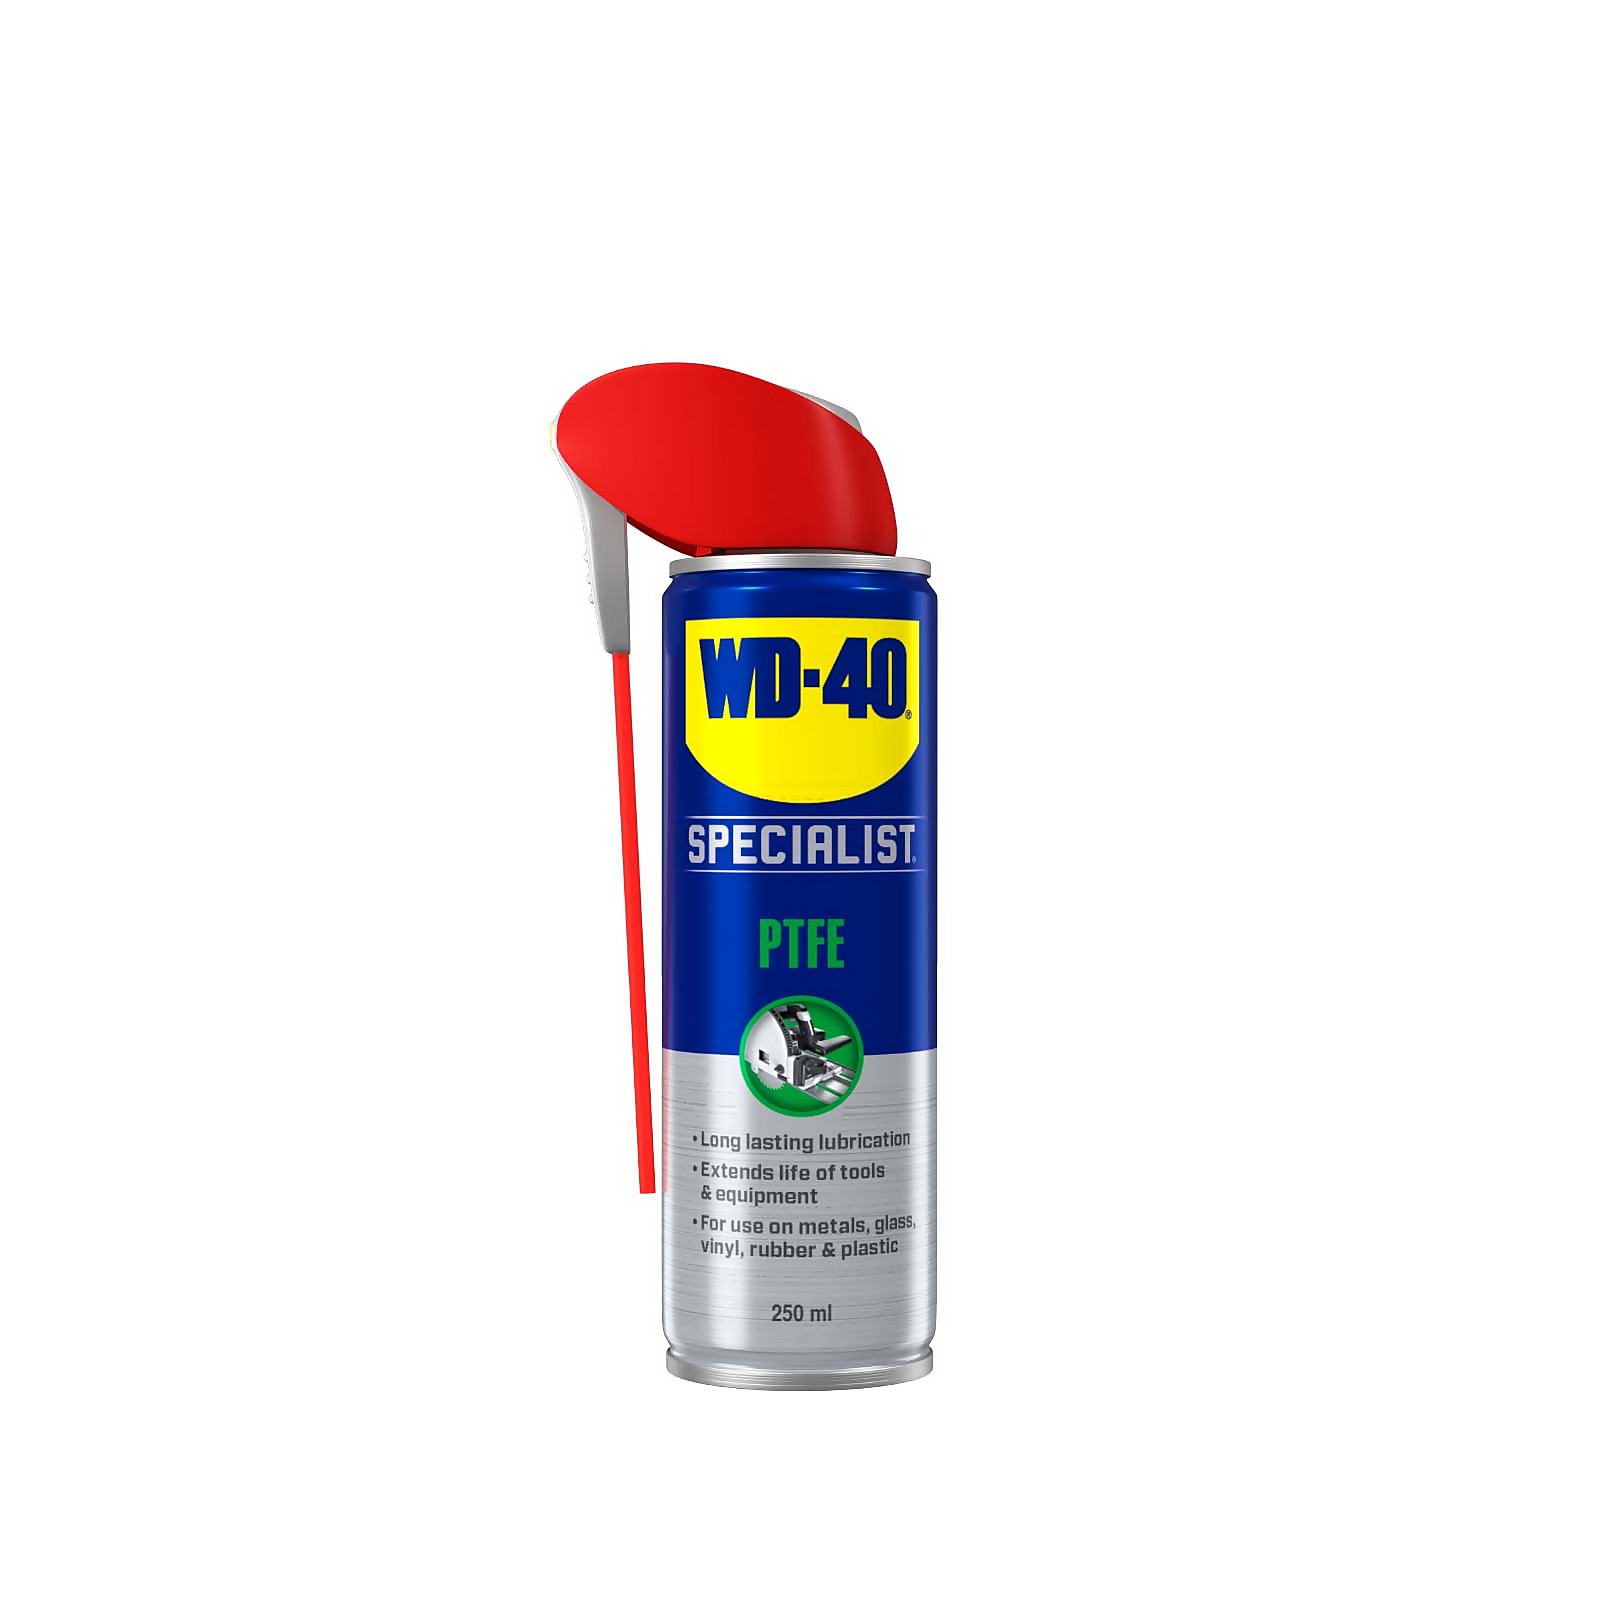 WD-40 Specialist PTFE Lubricant - 250ml